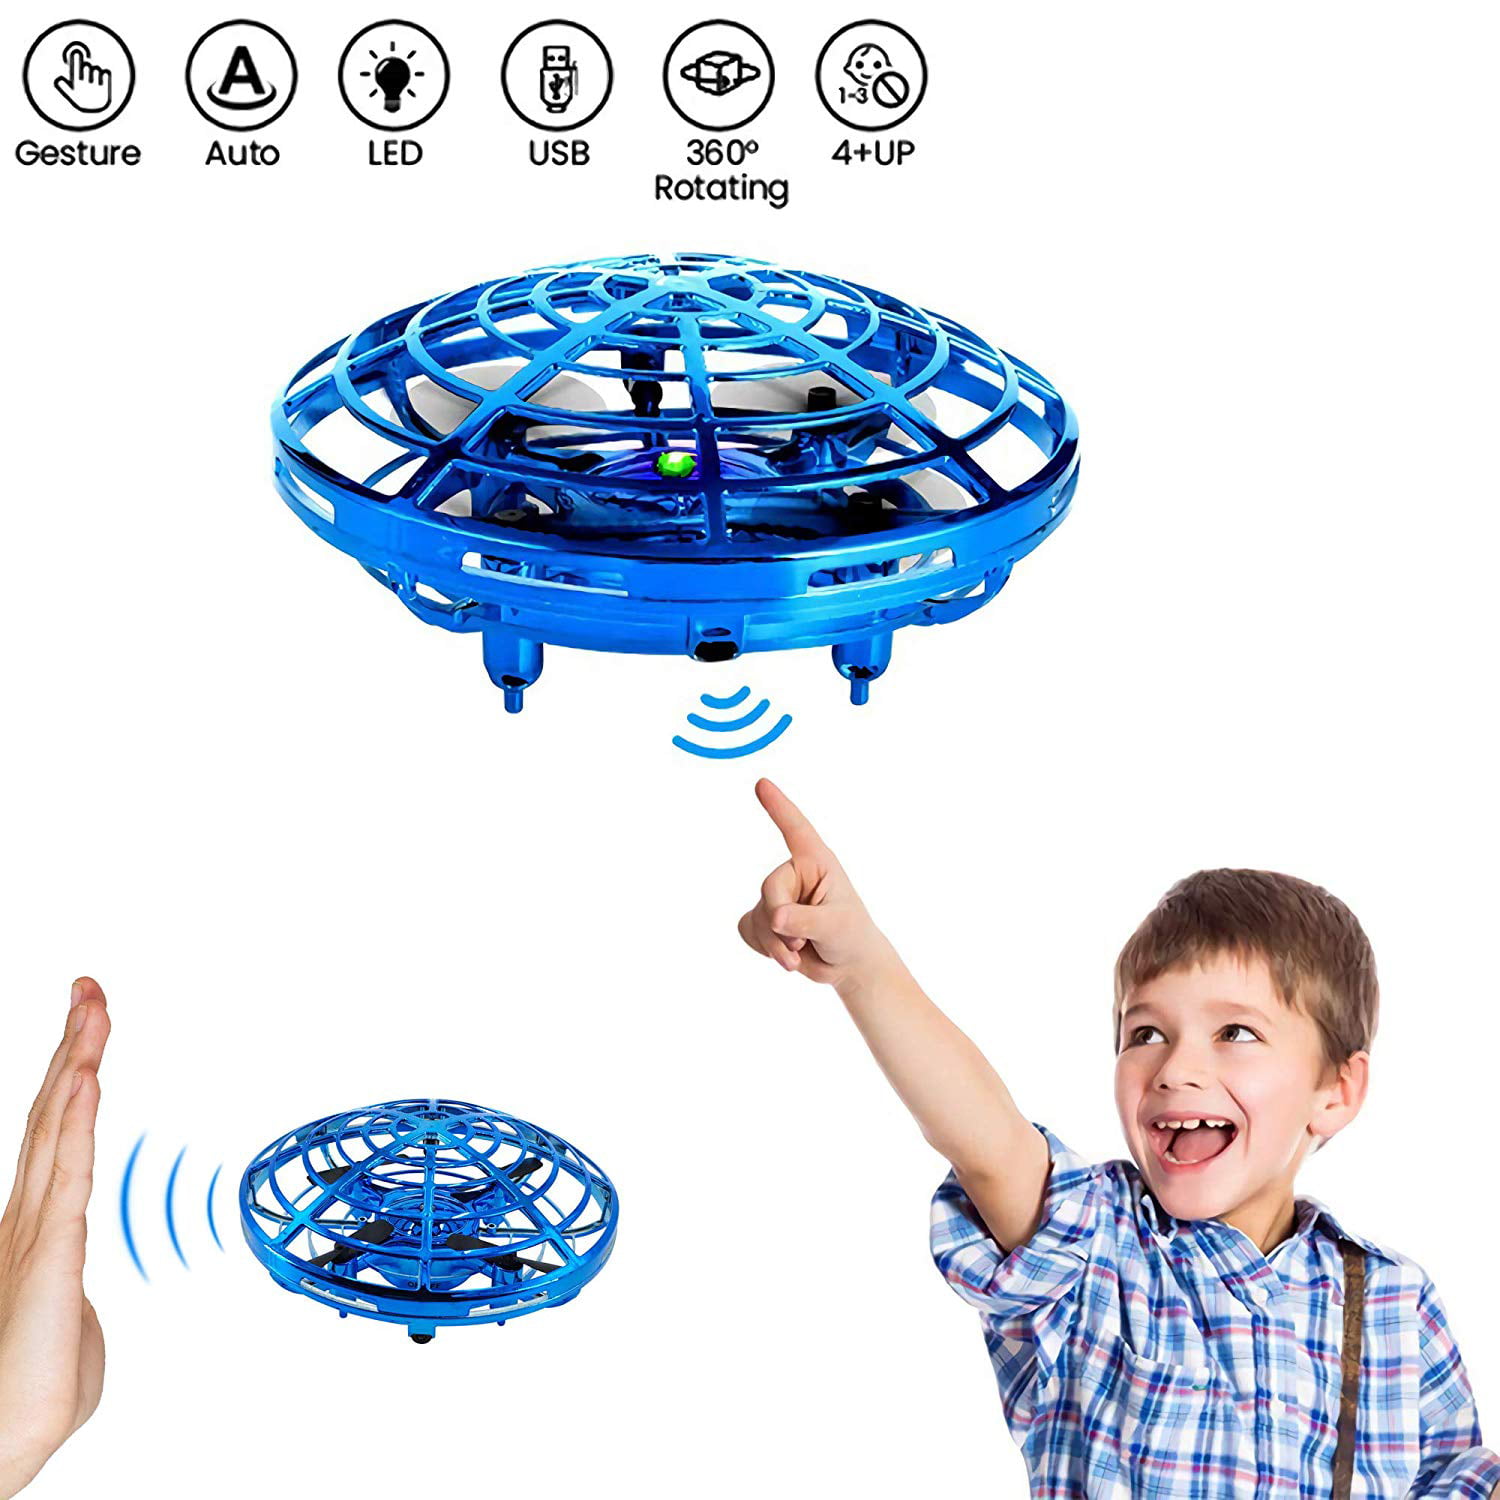 Details about   Mini Drone Quad Induction Levitation UFO Flying Toy Hand-controlled Kids Gift EM 